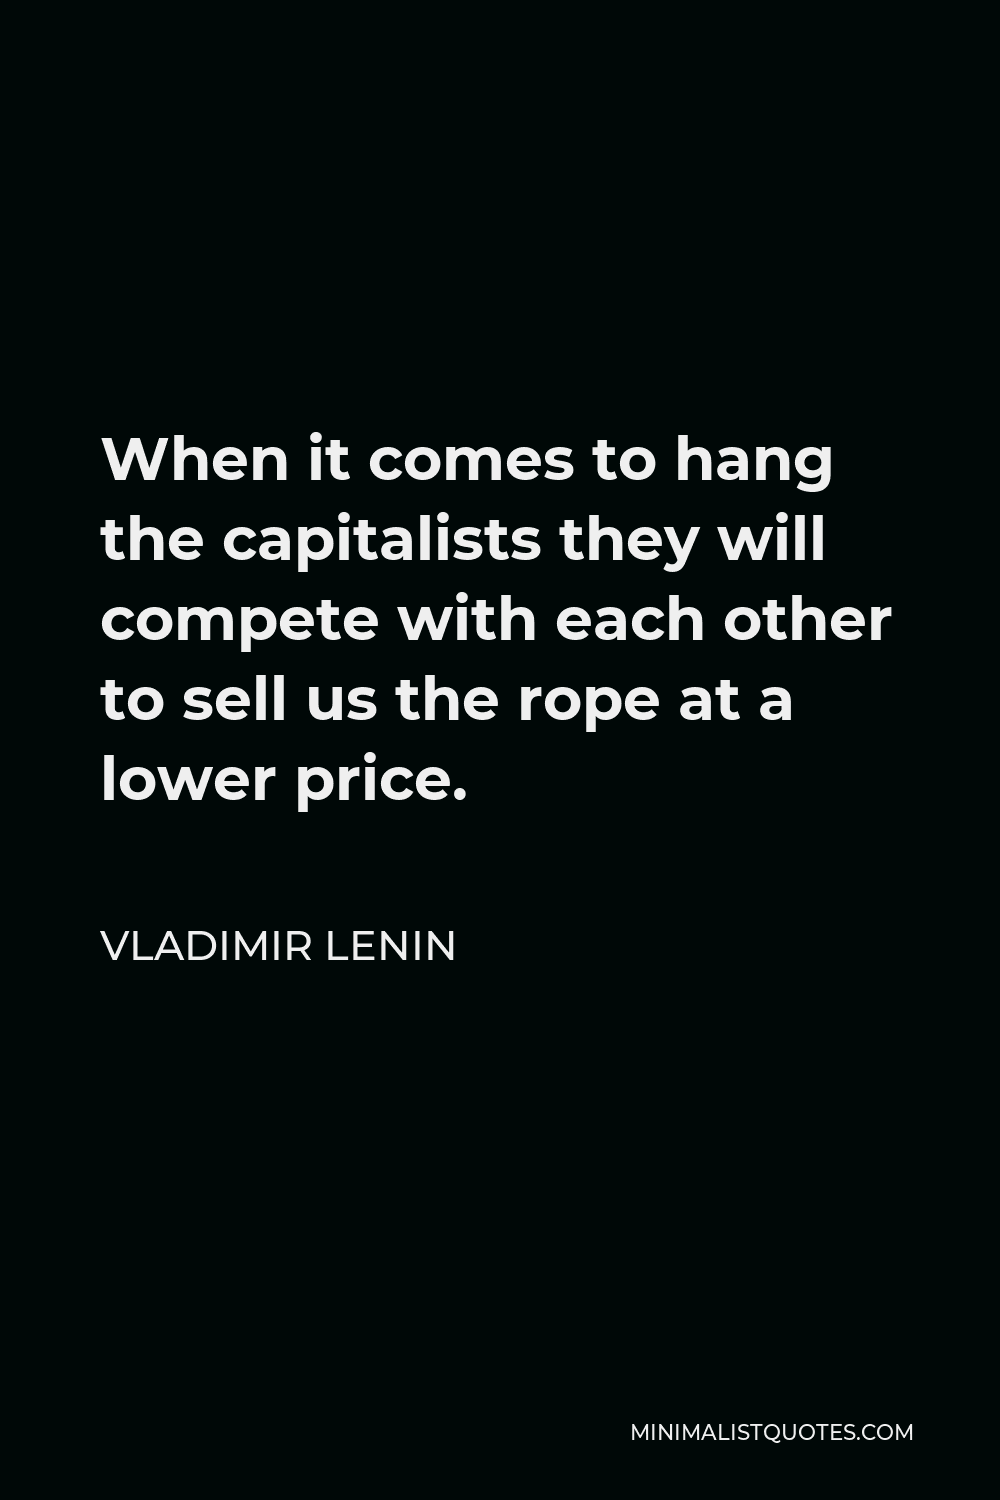 Vladimir Lenin Quote - When it comes to hang the capitalists they will compete with each other to sell us the rope at a lower price.